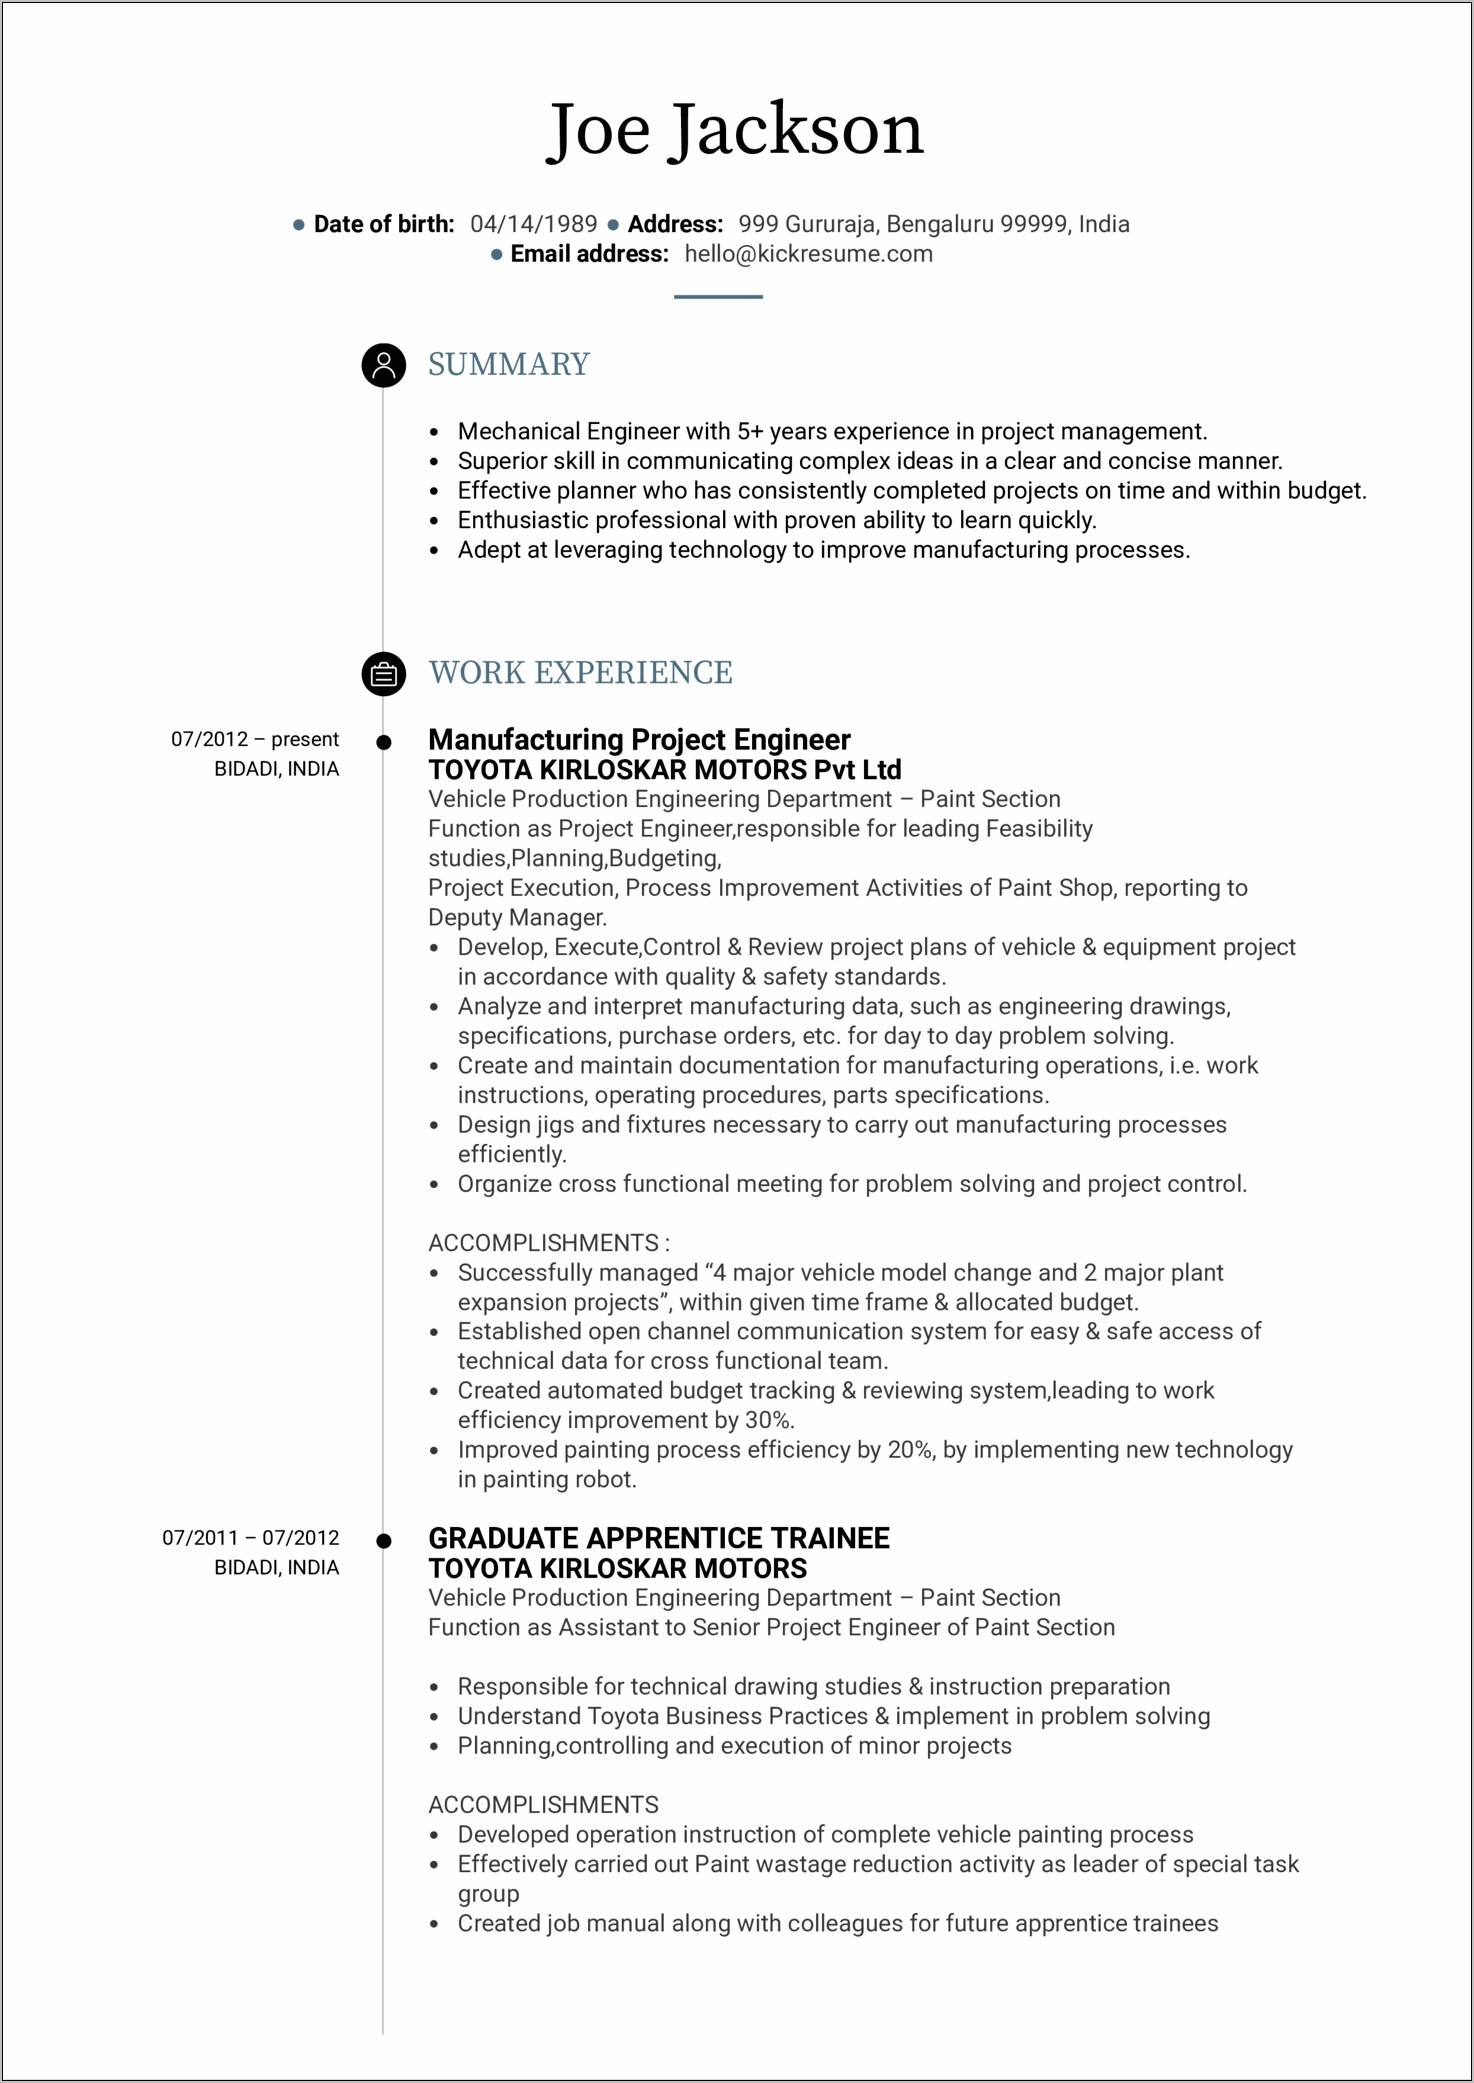 Sample Resume For Jobs In India